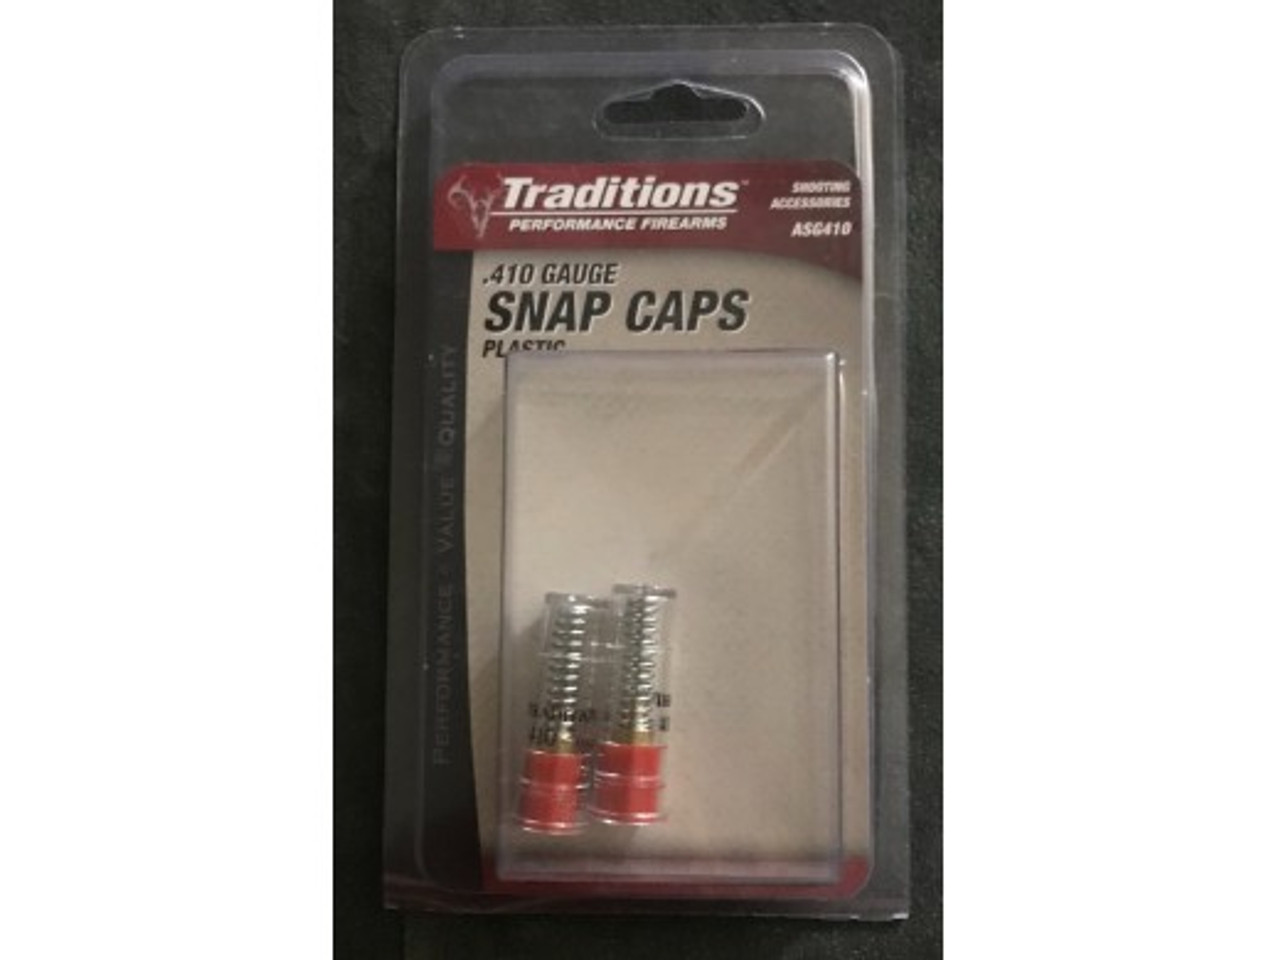 Snap Caps are made to protect your firearms by relieving the stress on your firing pins and firing pin springs. When you safely store your unloaded gun, put a snap cap in the chamber and fire your gun to allow the firing pin to lay at rest. This will help prevent firing pins from breaking in the future. Snap Caps are also a great tool to practice dry firing your guns to teach safe gun handling, improve your shooting skills and tune your trigger. .410, 2 per package.